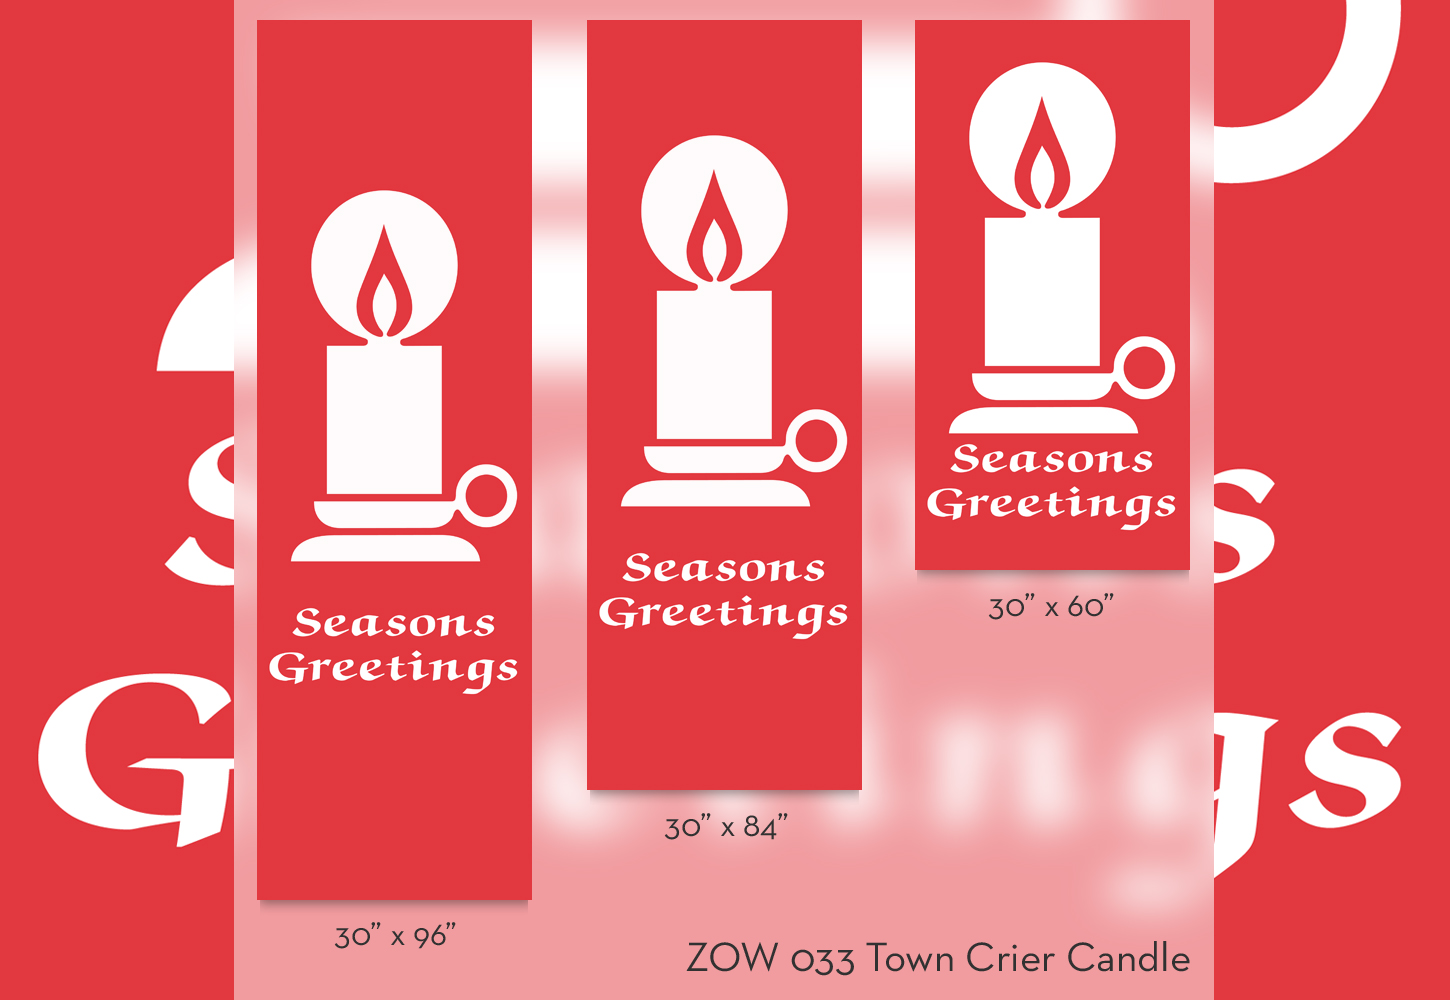 ZOW 033 Town Crier Candle